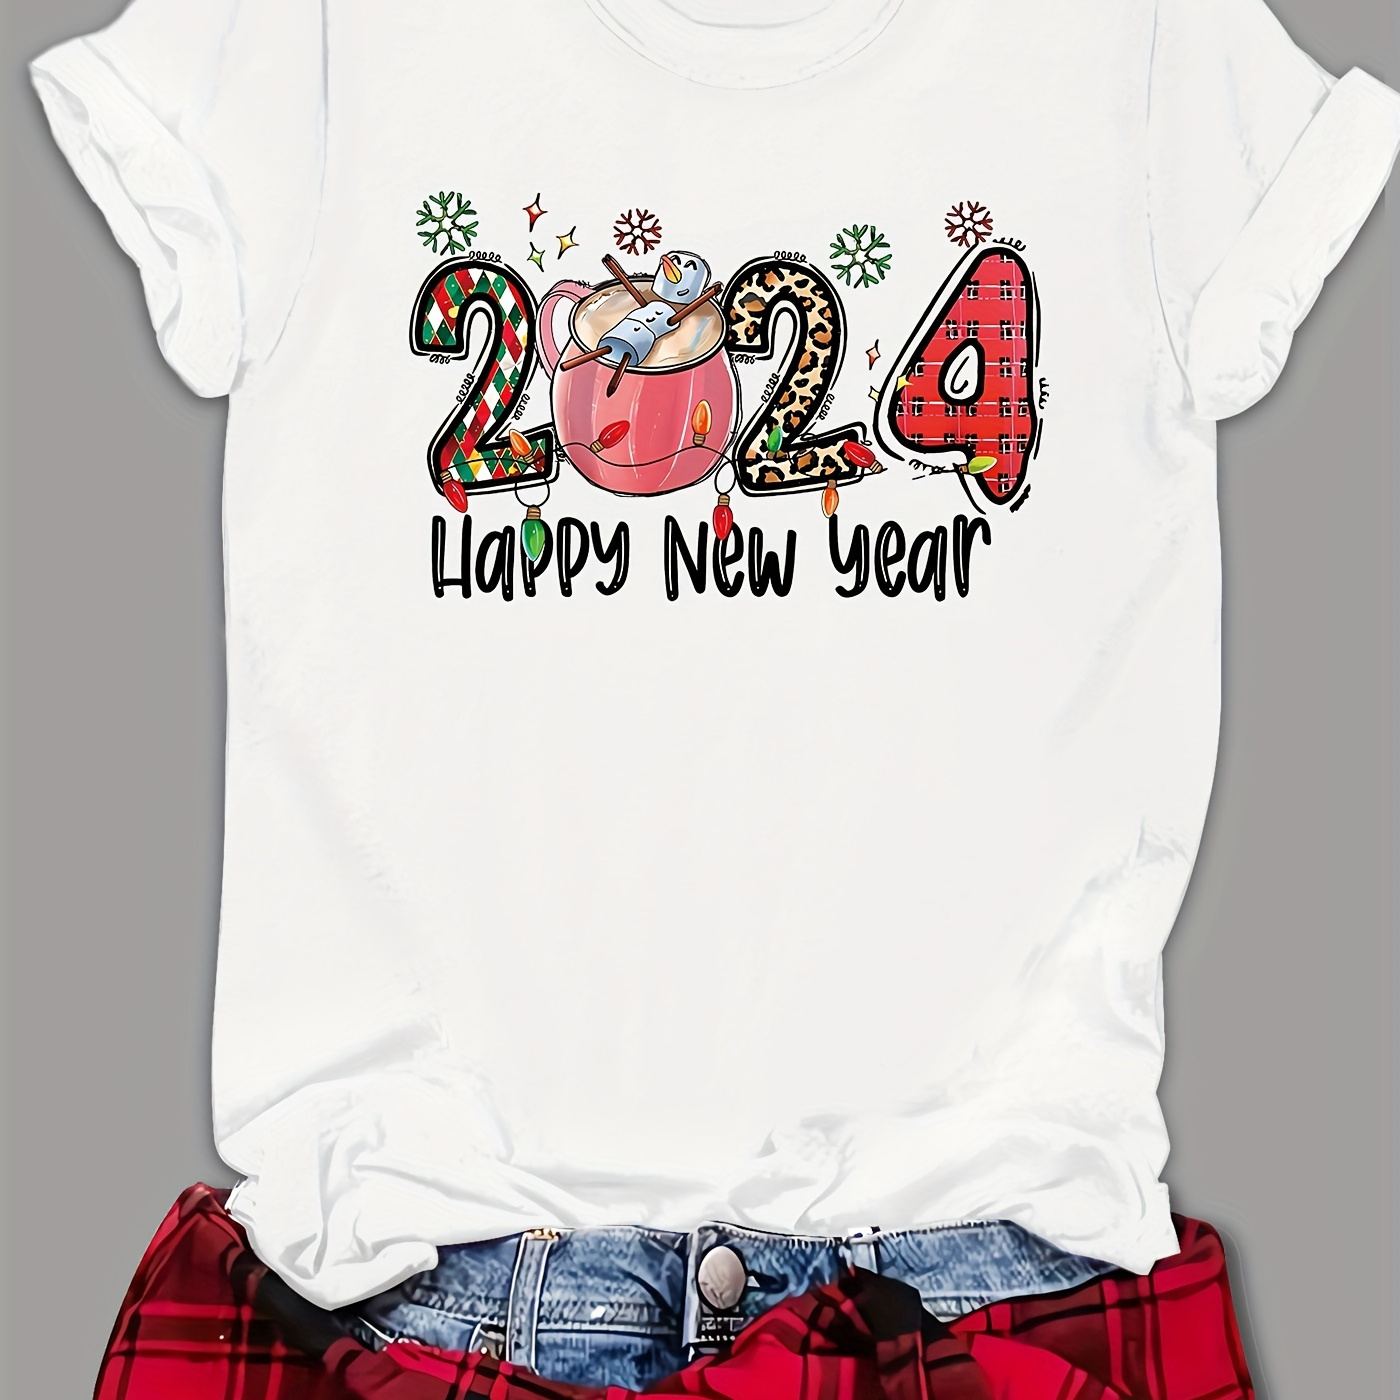 Mrat T Shirts for Women UK Clearance Happy New Year Printed Tops